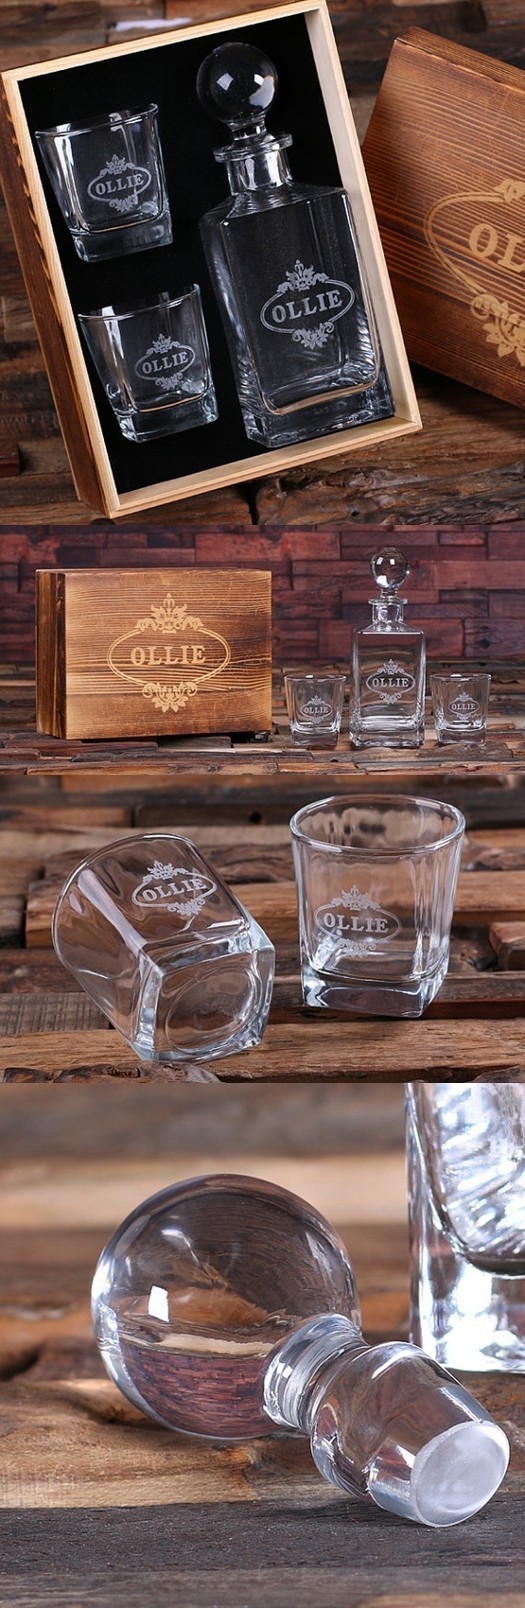 Personalized Whiskey Glass Set with Wooden Box